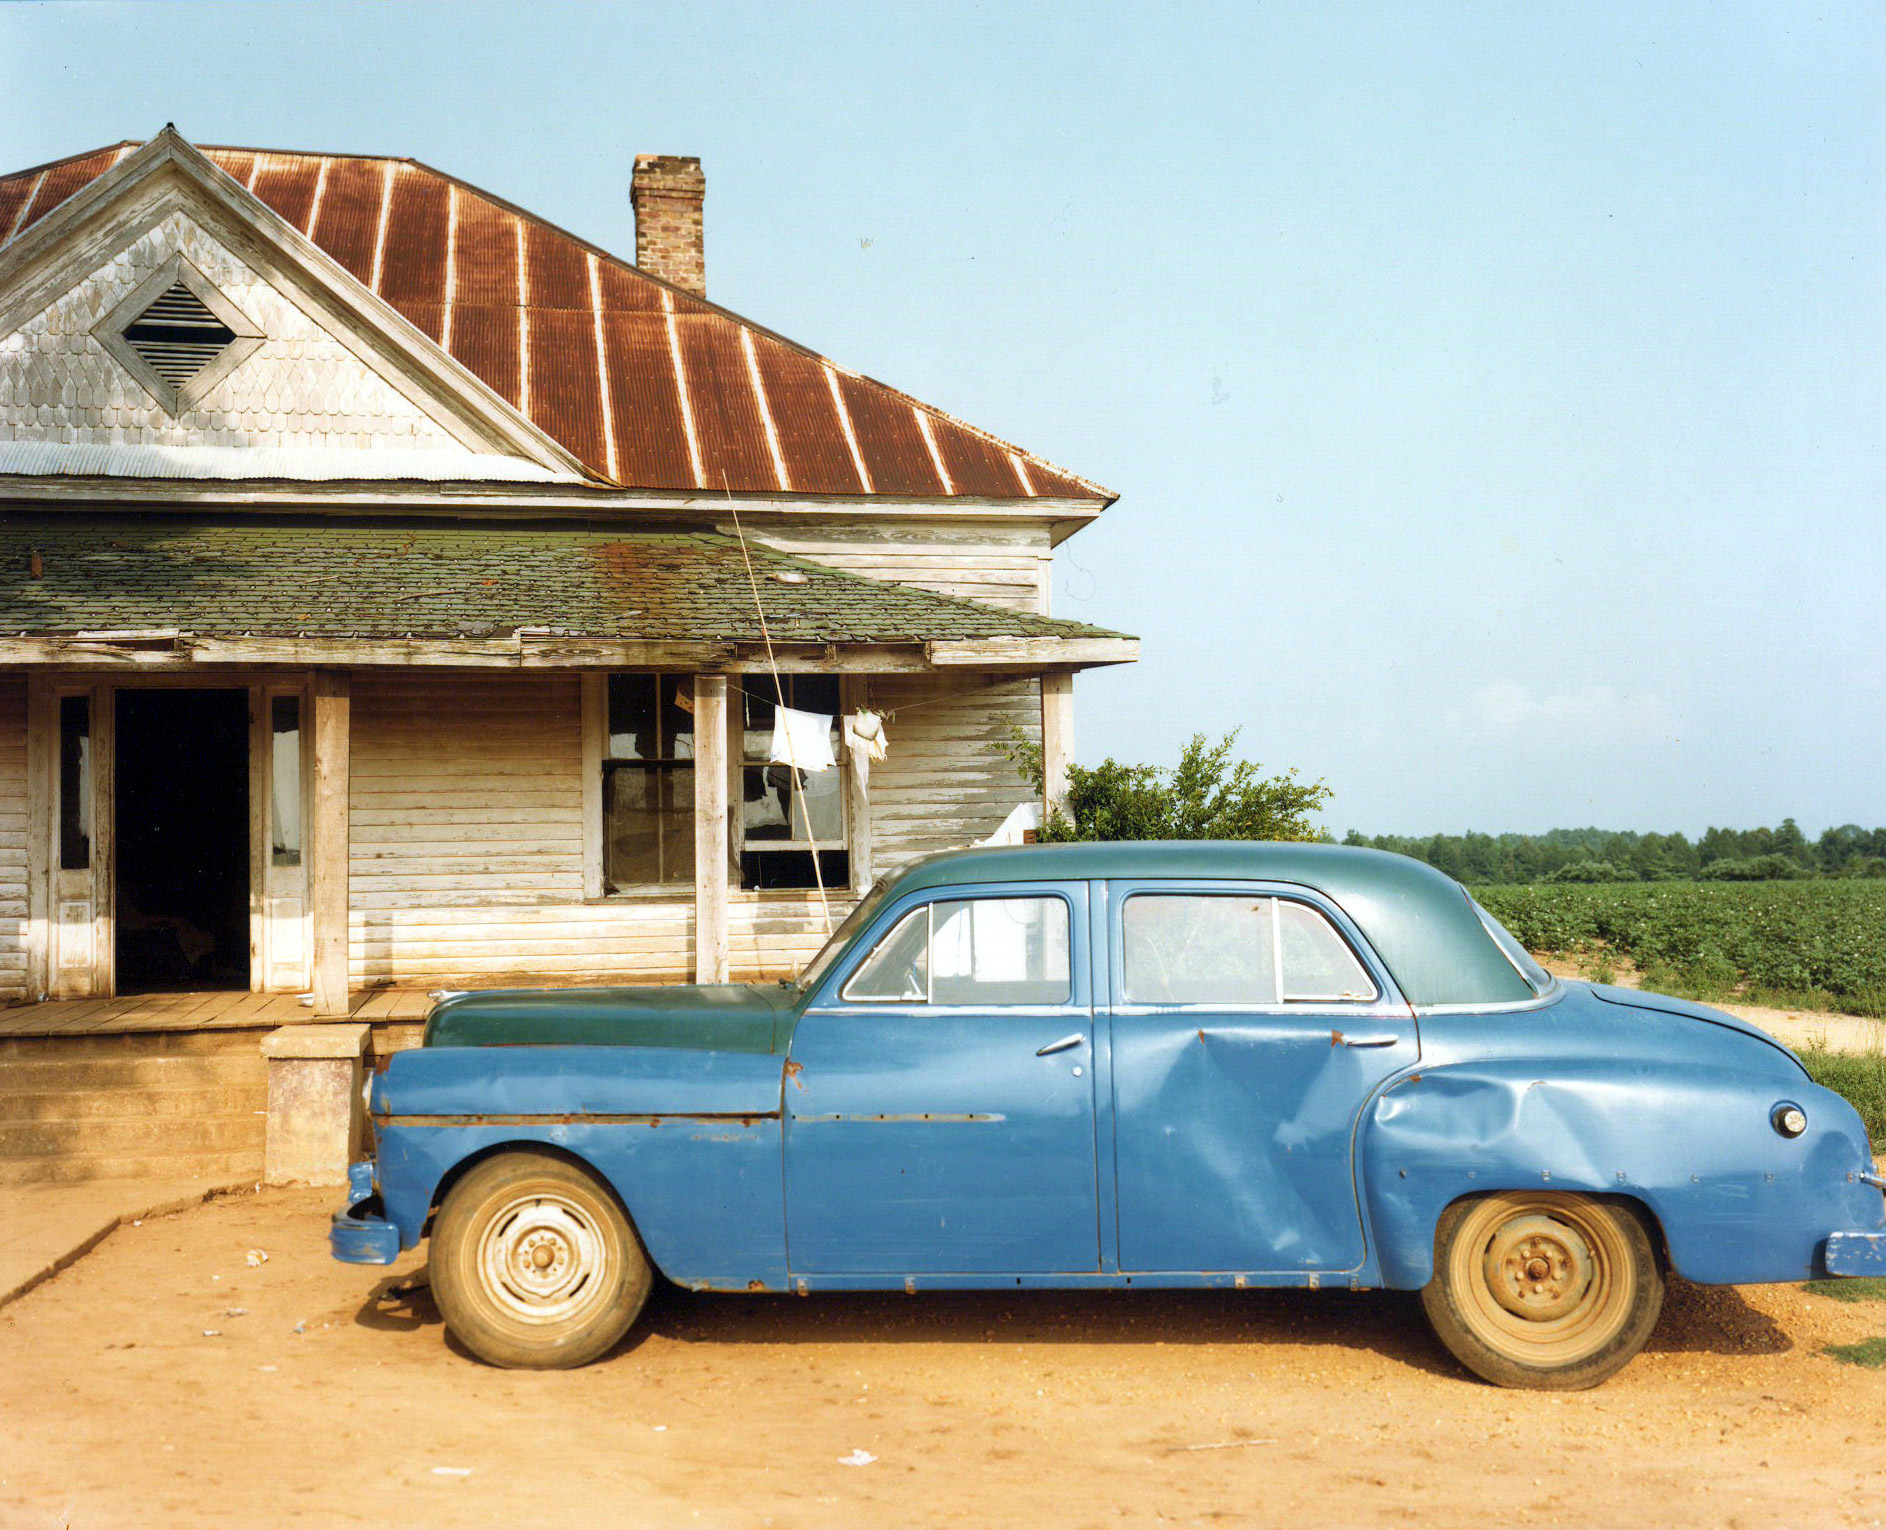 House and Car, Near Akron, Alabama, 1978 by William Christenberry